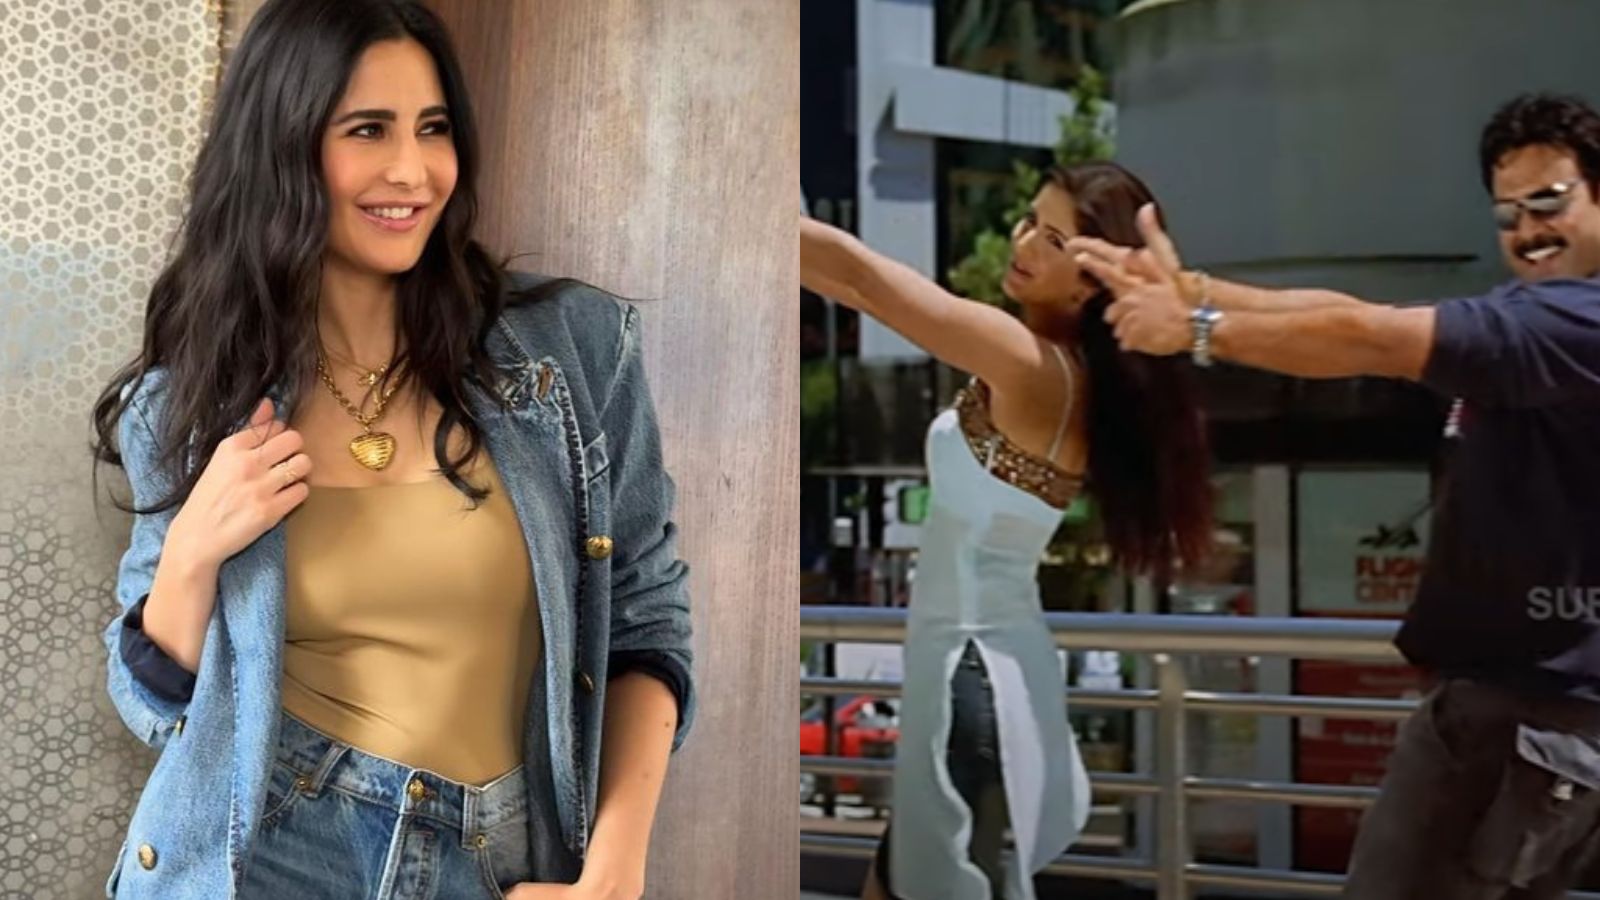 android, ‘this girl cannot dance’: katrina kaif recalls how this was said on mic on malliswari sets, people told her she’ll never succeed